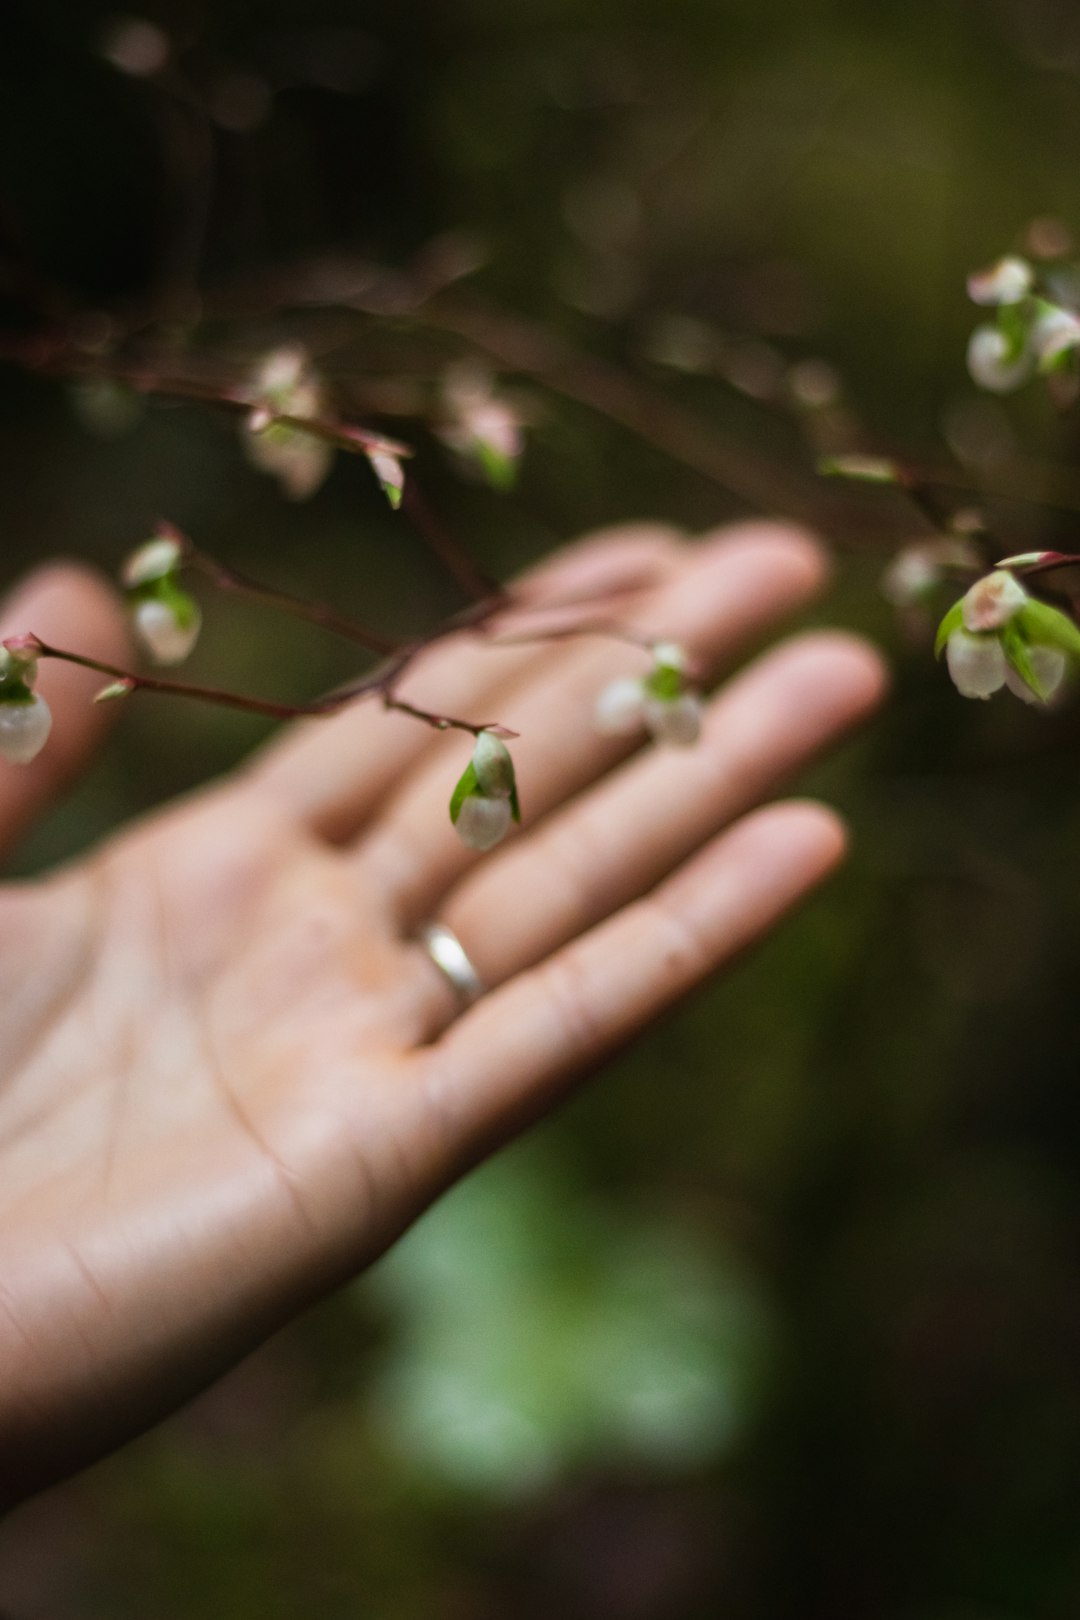 soft focus of woman's hand gently holding budding leaf